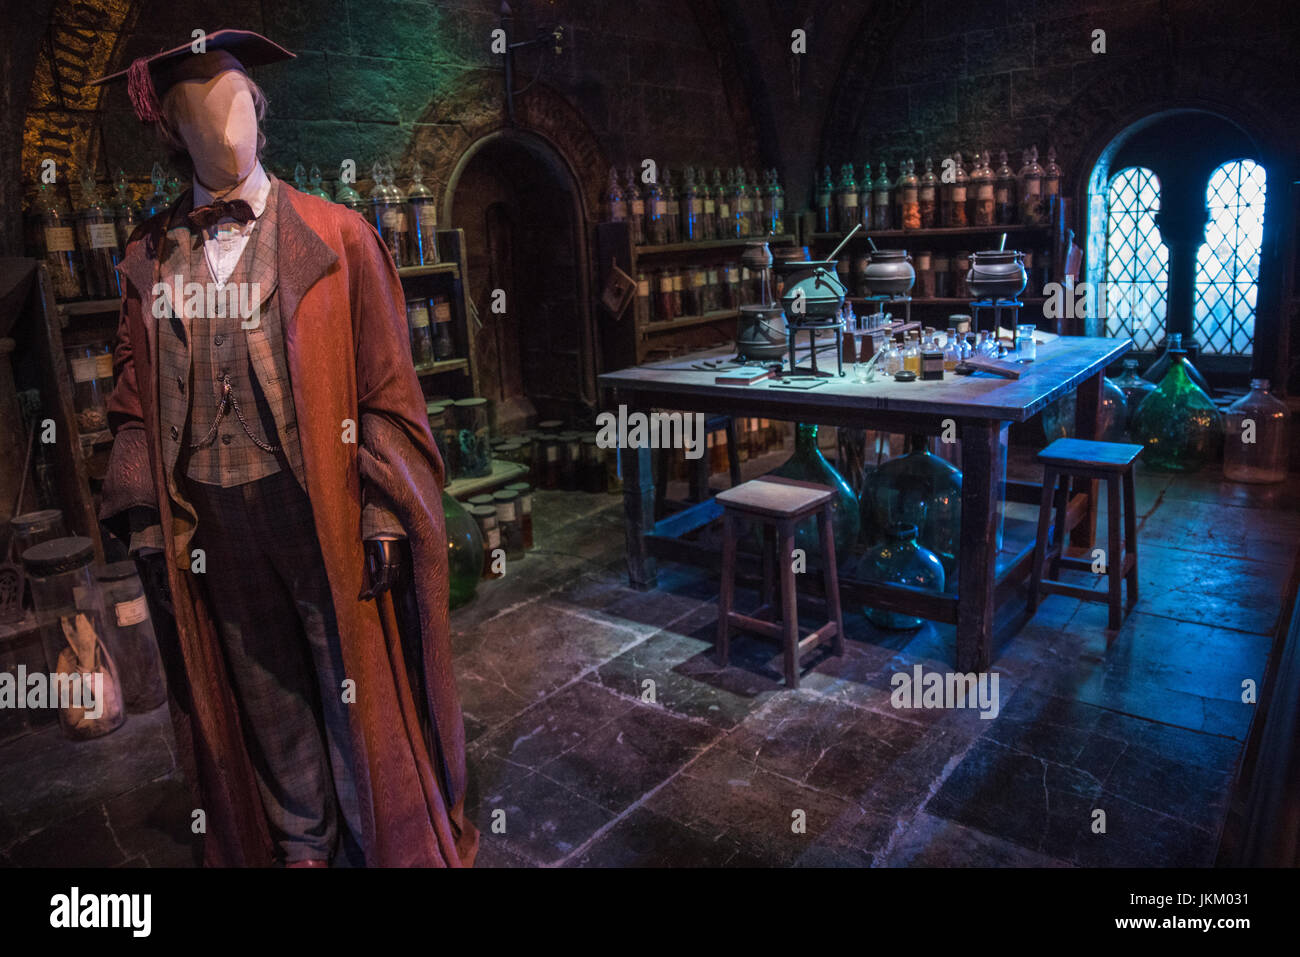 LEAVESDEN, UK - JUNE 19TH 2017: The set of the Potions classroom at the Making of Harry Potter tour at Warner Bros studio in Leavesden, UK, on 19th Ju Stock Photo